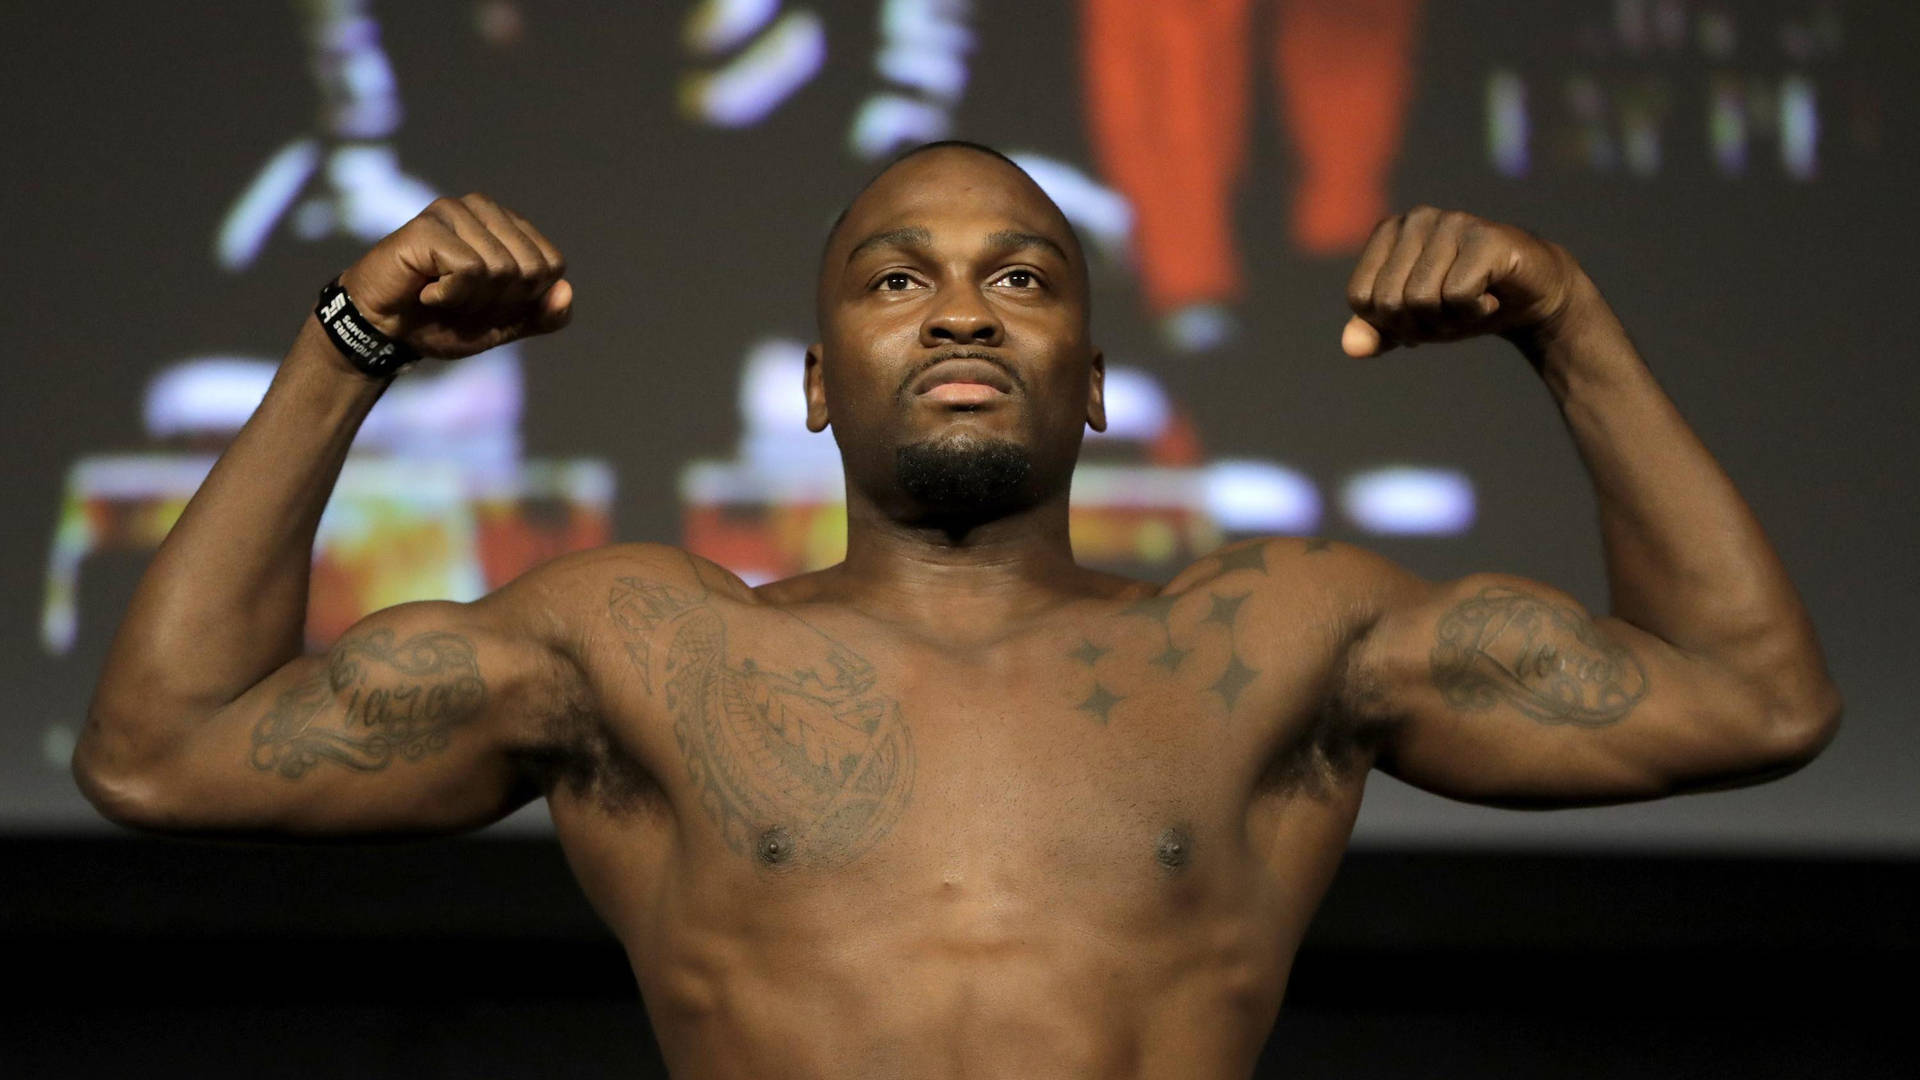 Derekbrunson Straight-faced Would Be Translated To 